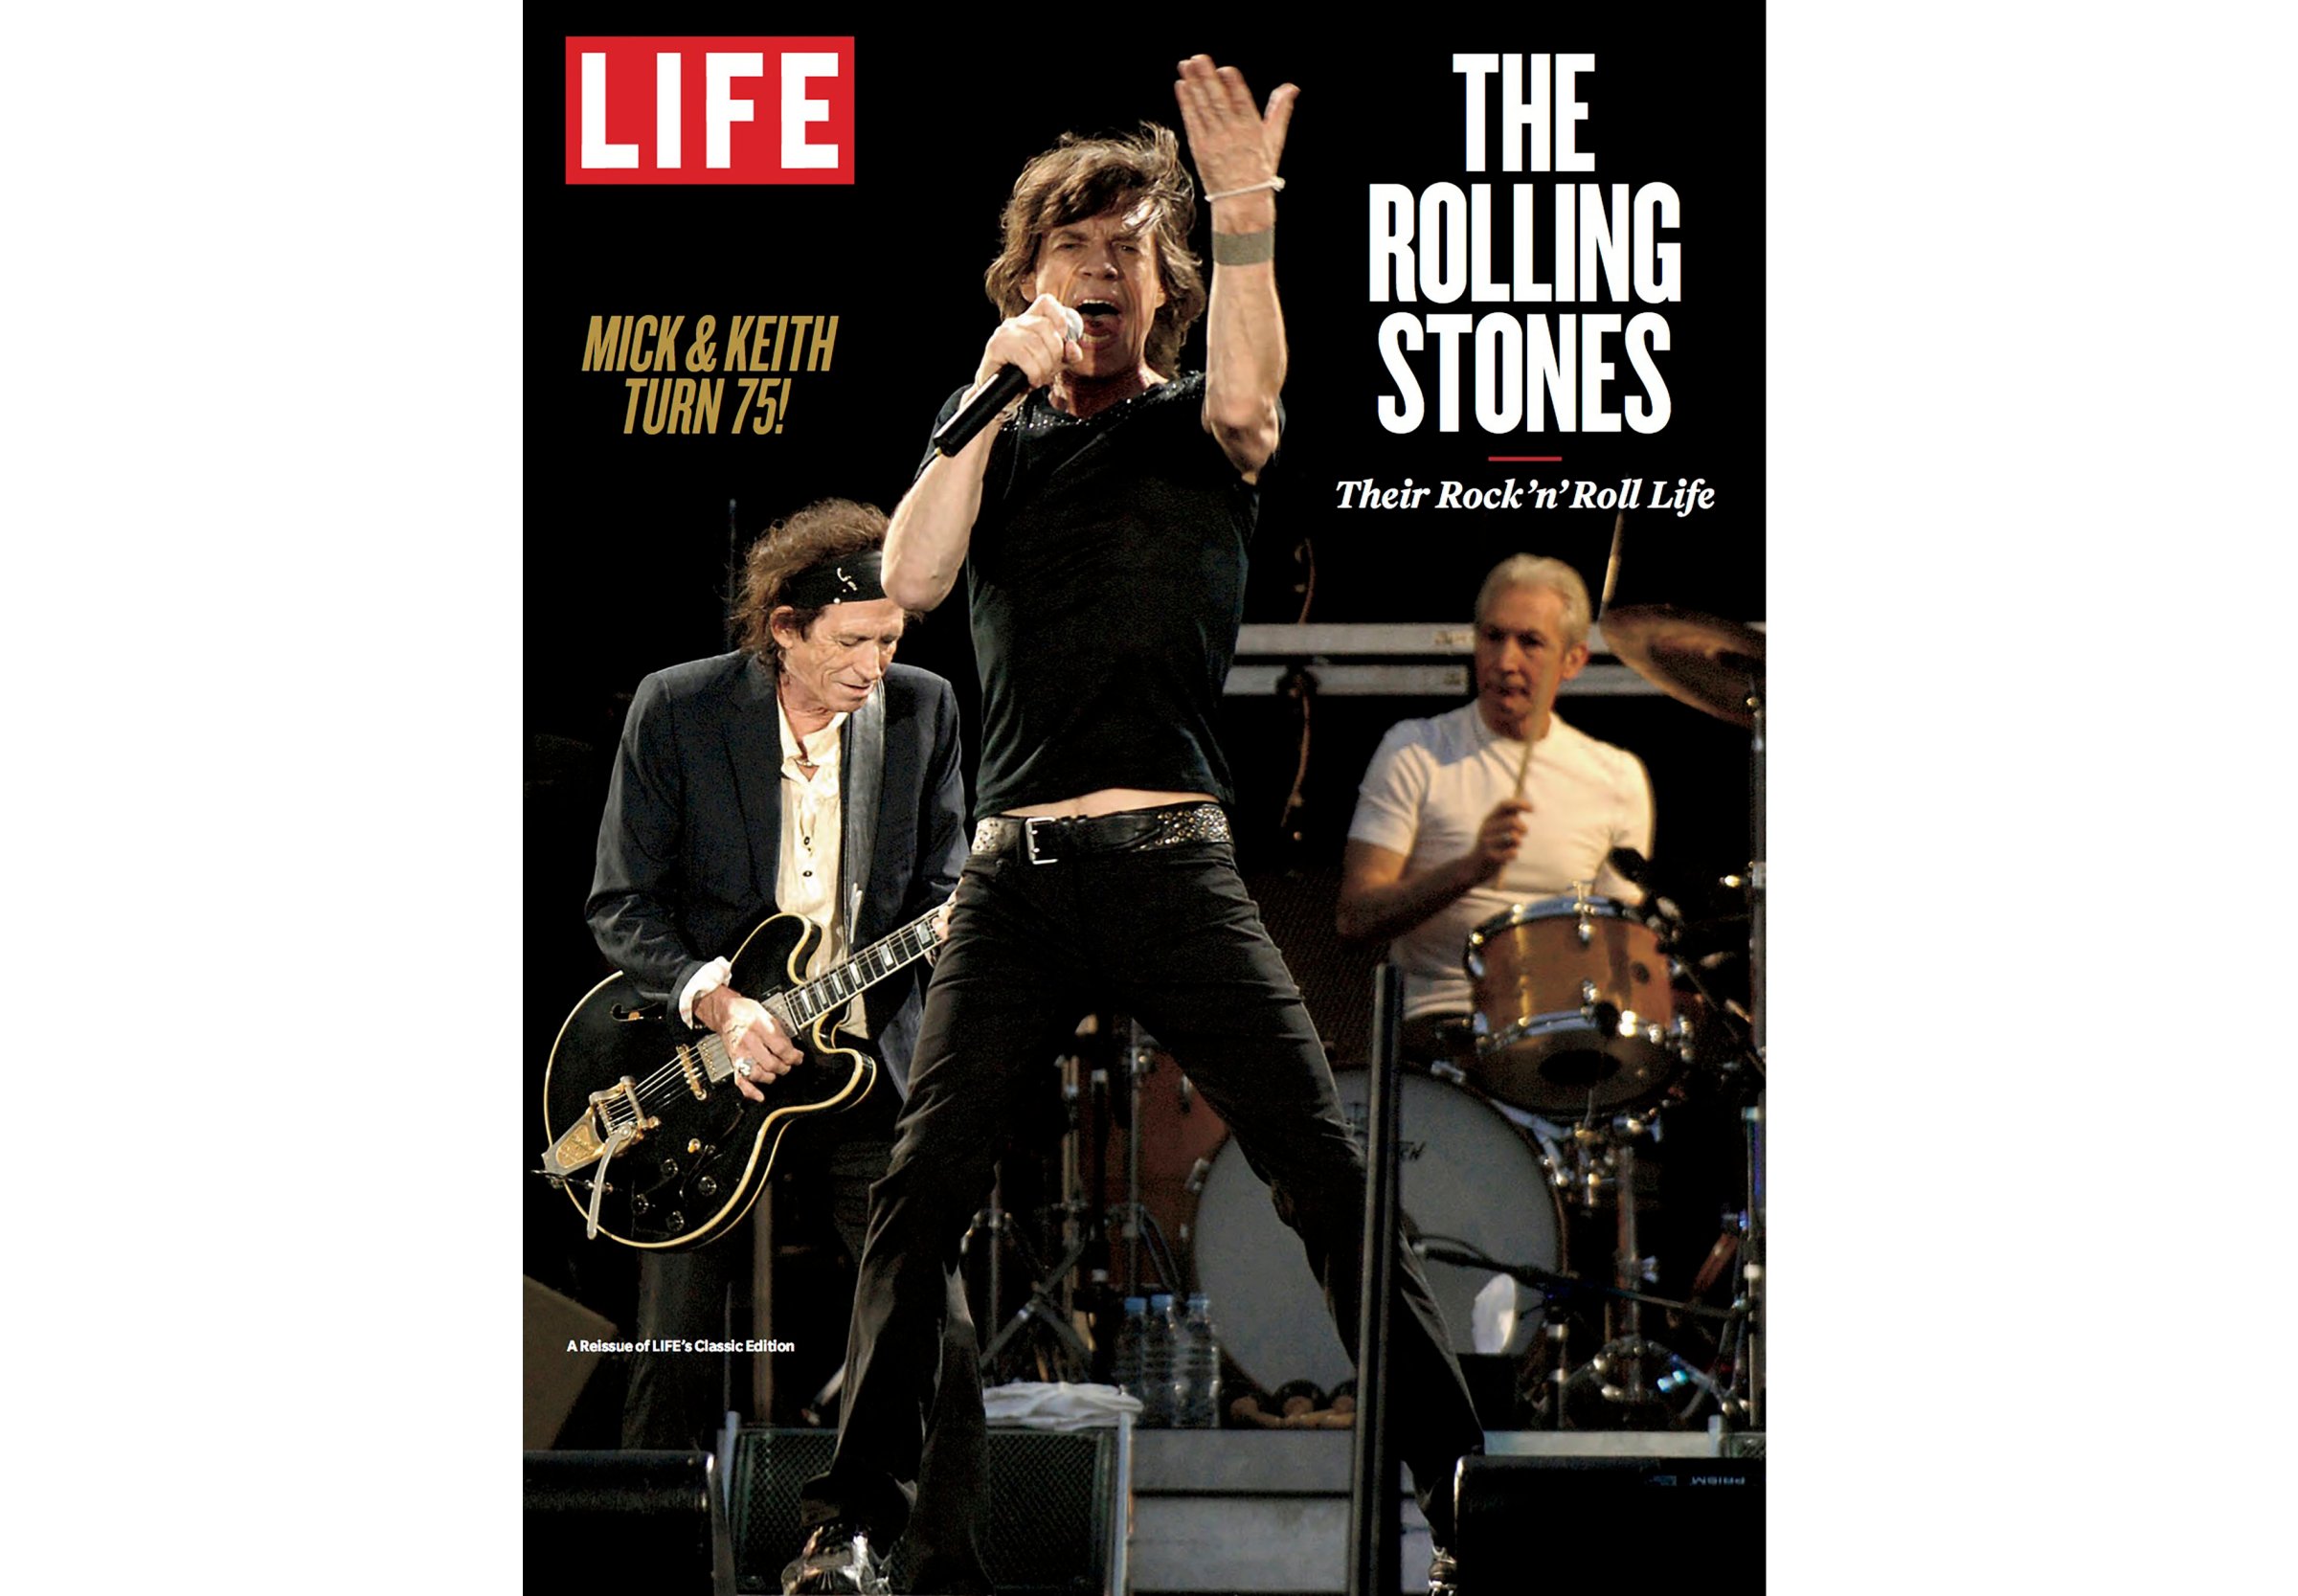 Mick Jagger on the cover of LIFE